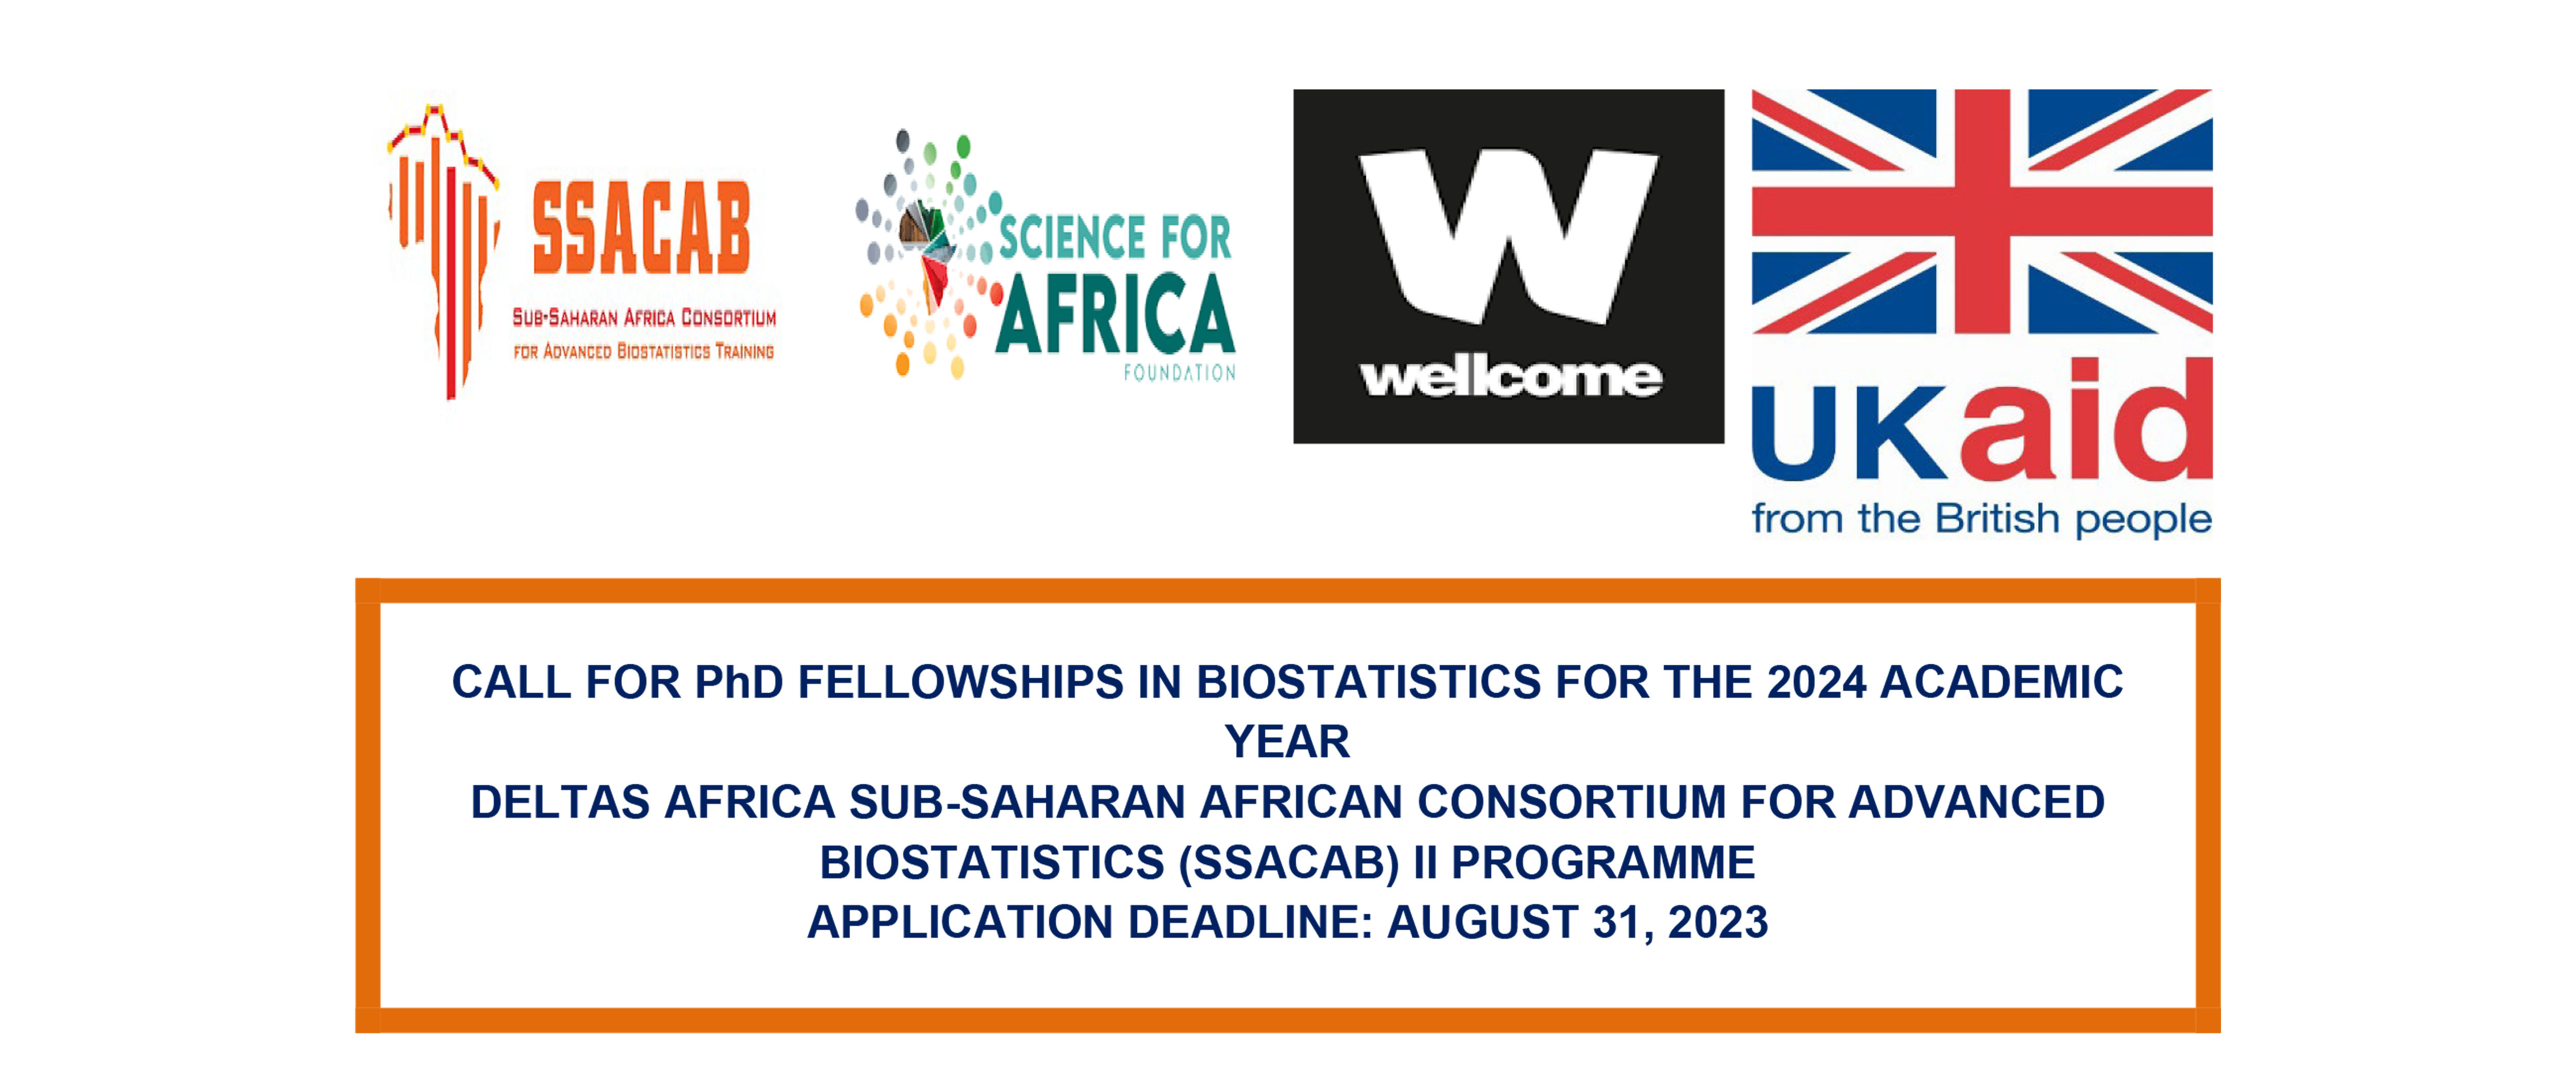 Call for PhD Fellowships in Biostatistics for the 2024 Academic Year